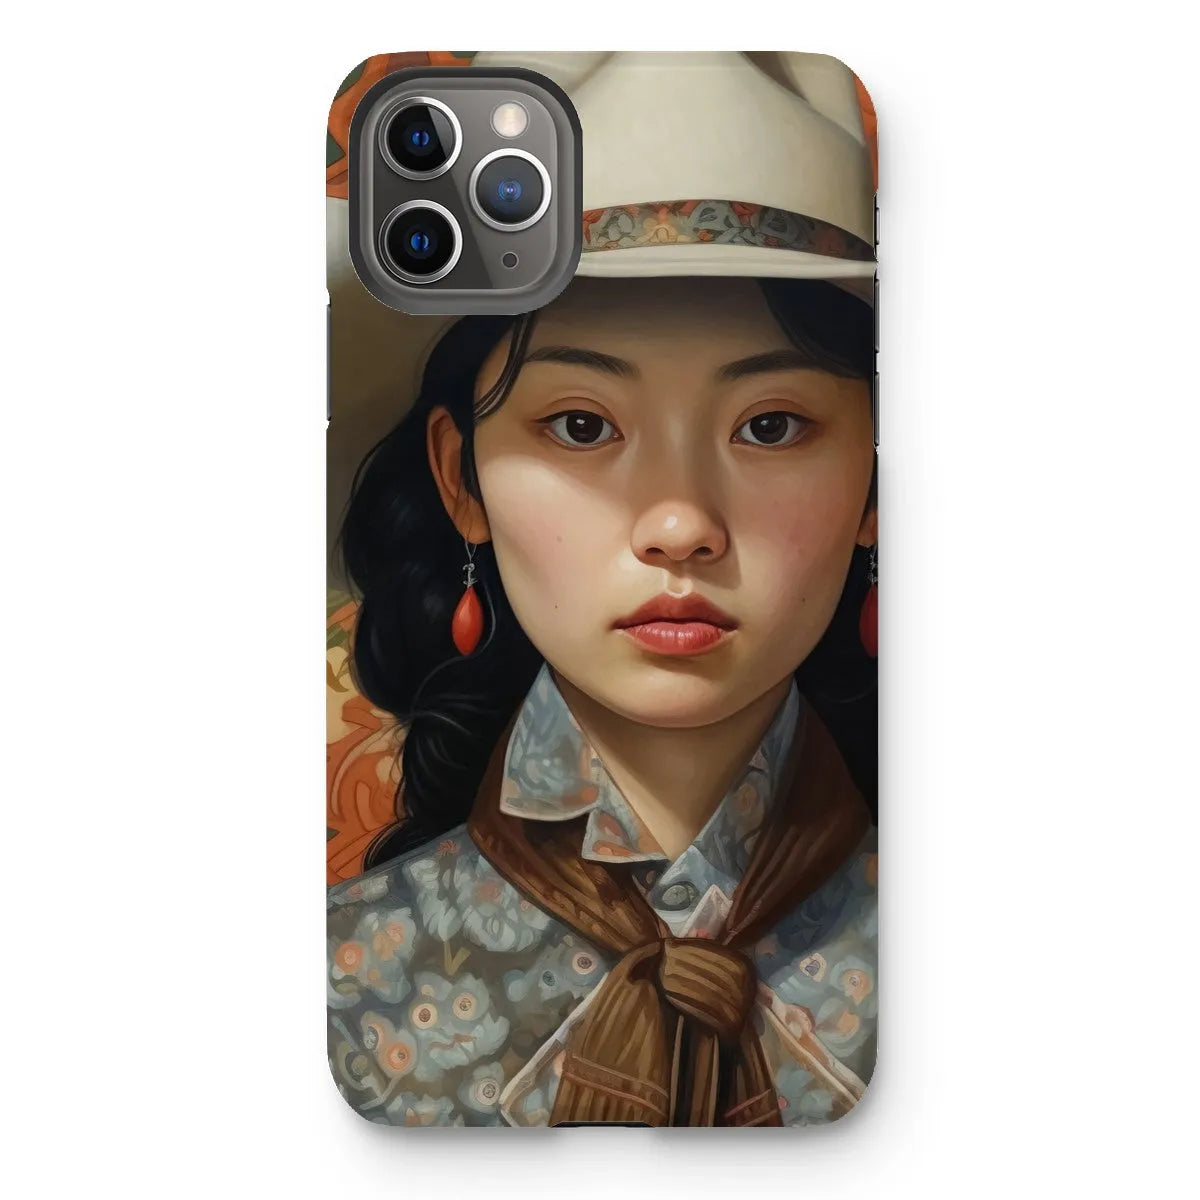 Zhi The Lesbian Cowgirl - Sapphic Art Phone Case - Iphone 11 Pro Max / Matte - Mobile Phone Cases - Aesthetic Art